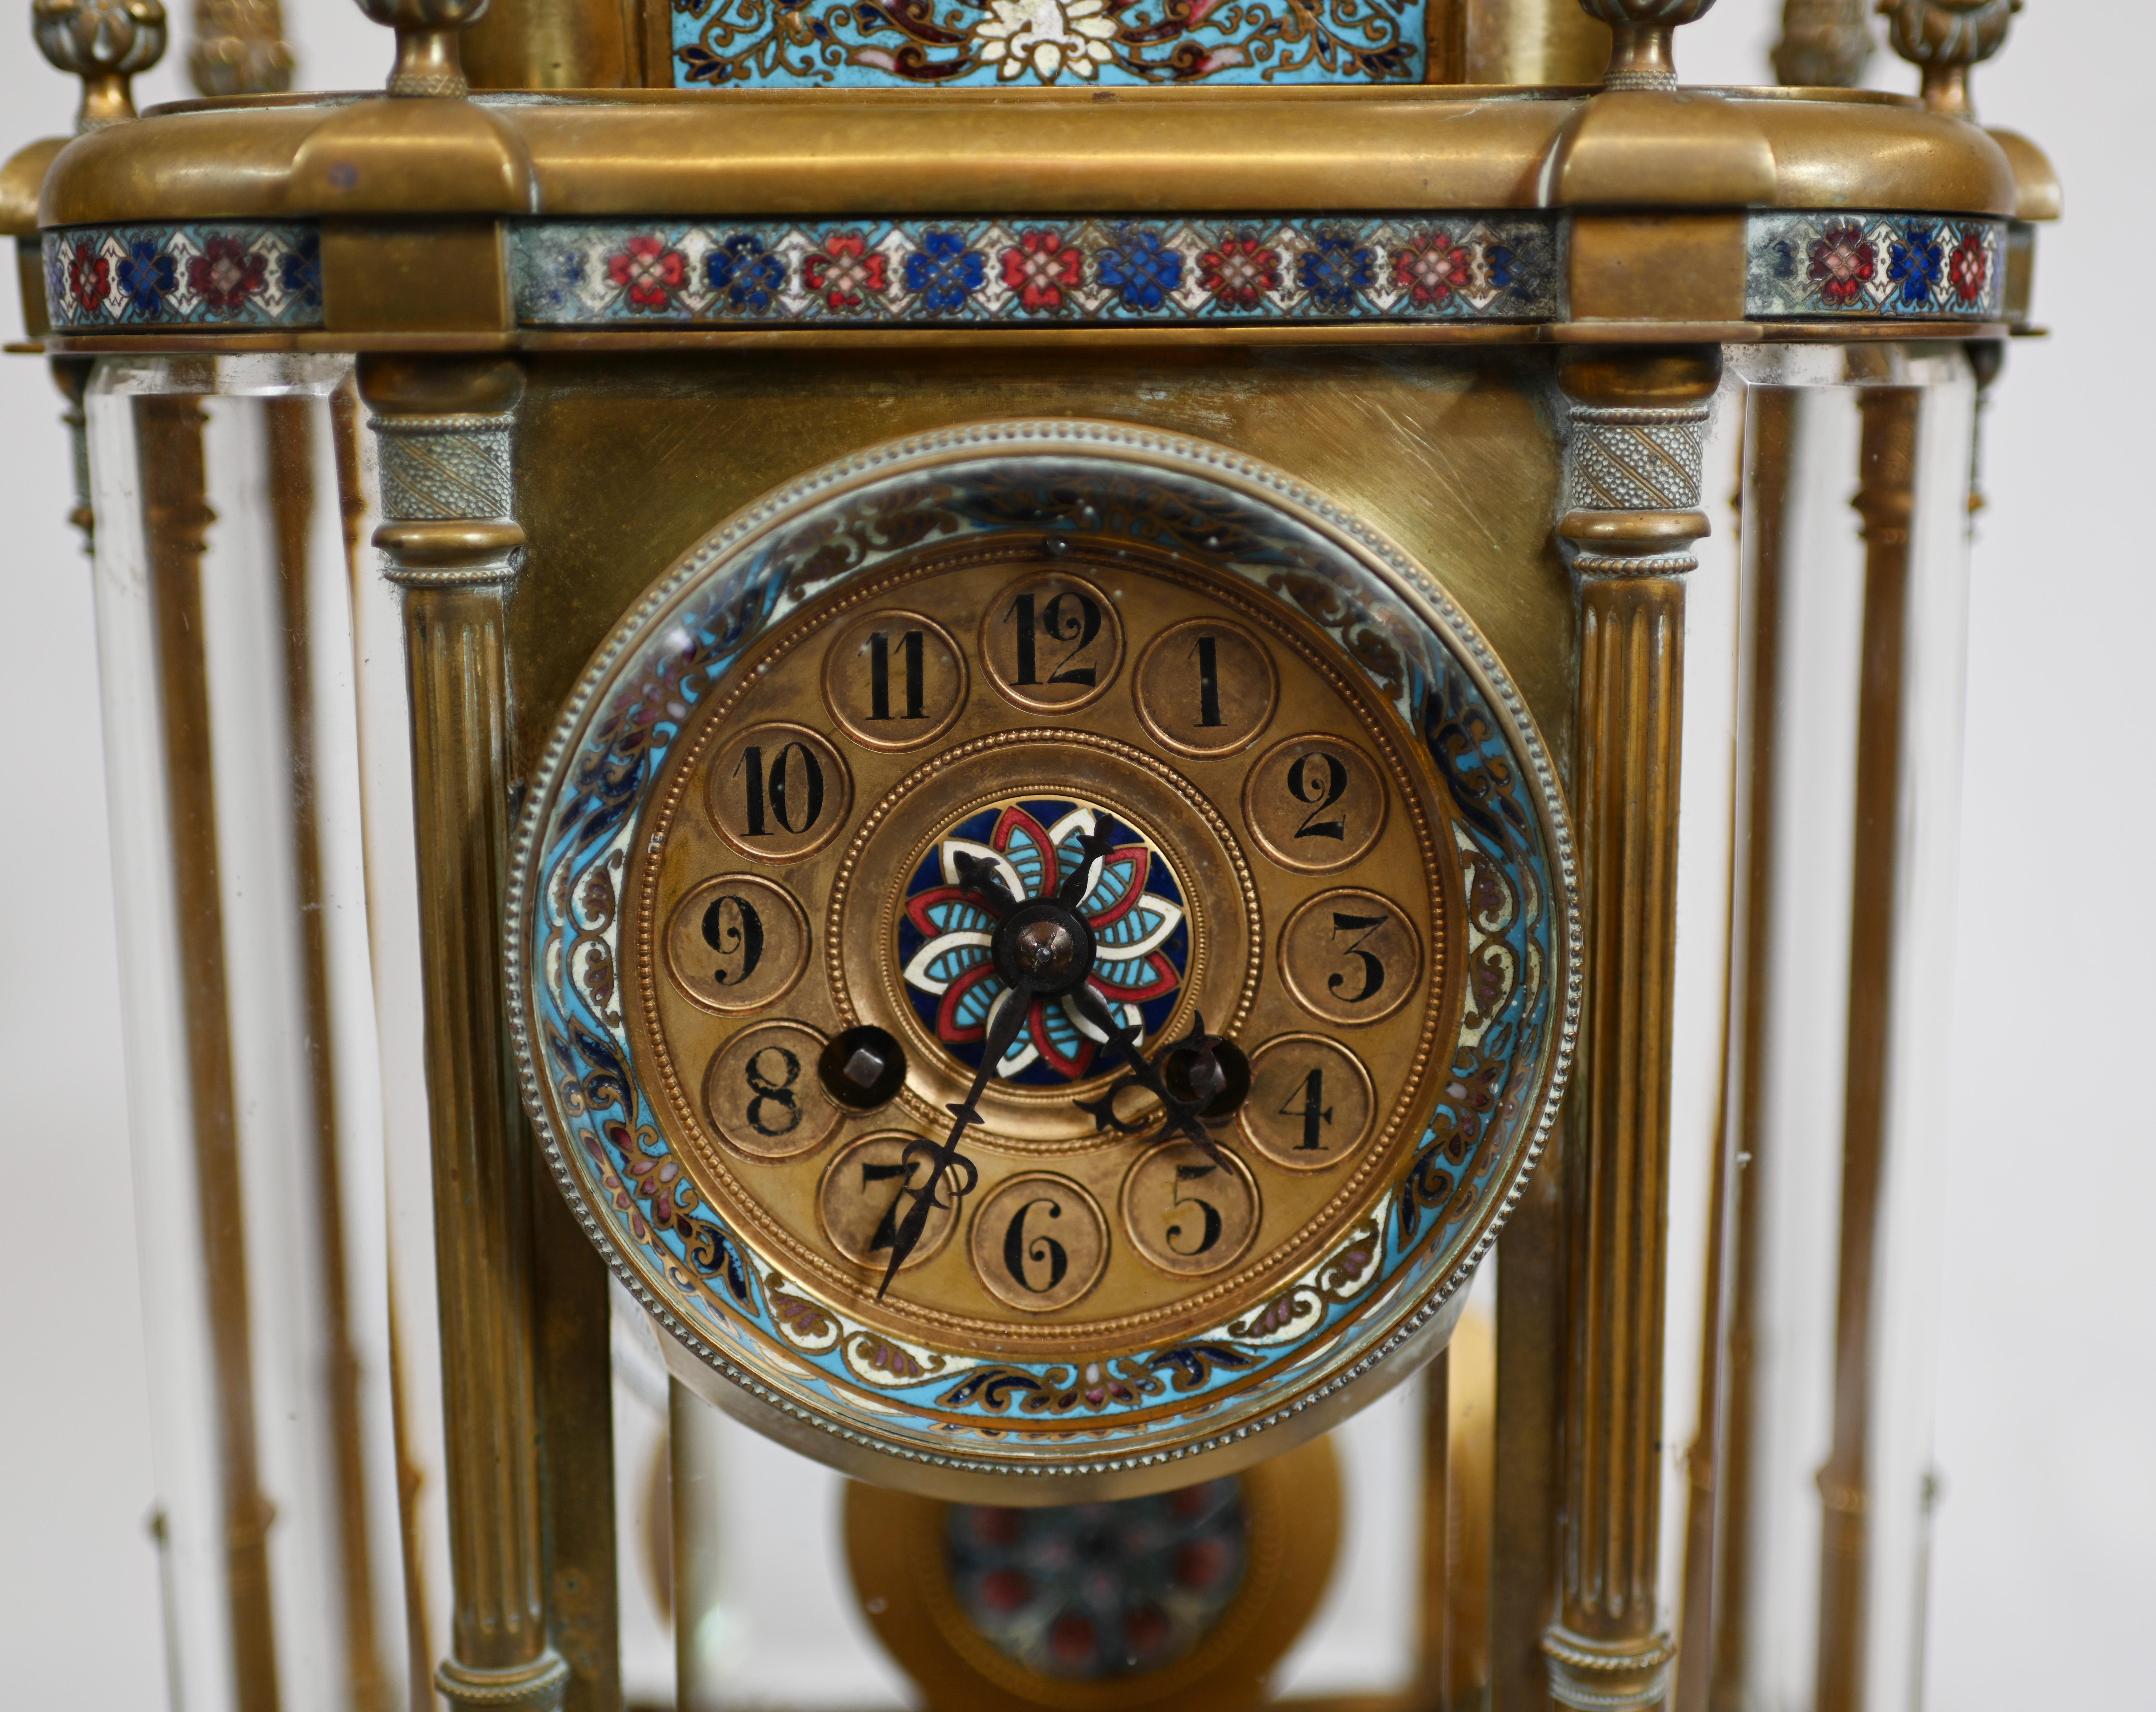 Gorgeous antique French three piece clock set
Mantle clock is flanked by the two urns 
We date this to circa 1860
Set features intricate champleve designs on all surfaces
Champleve is a decorative technique that fuses a powdered glassy material